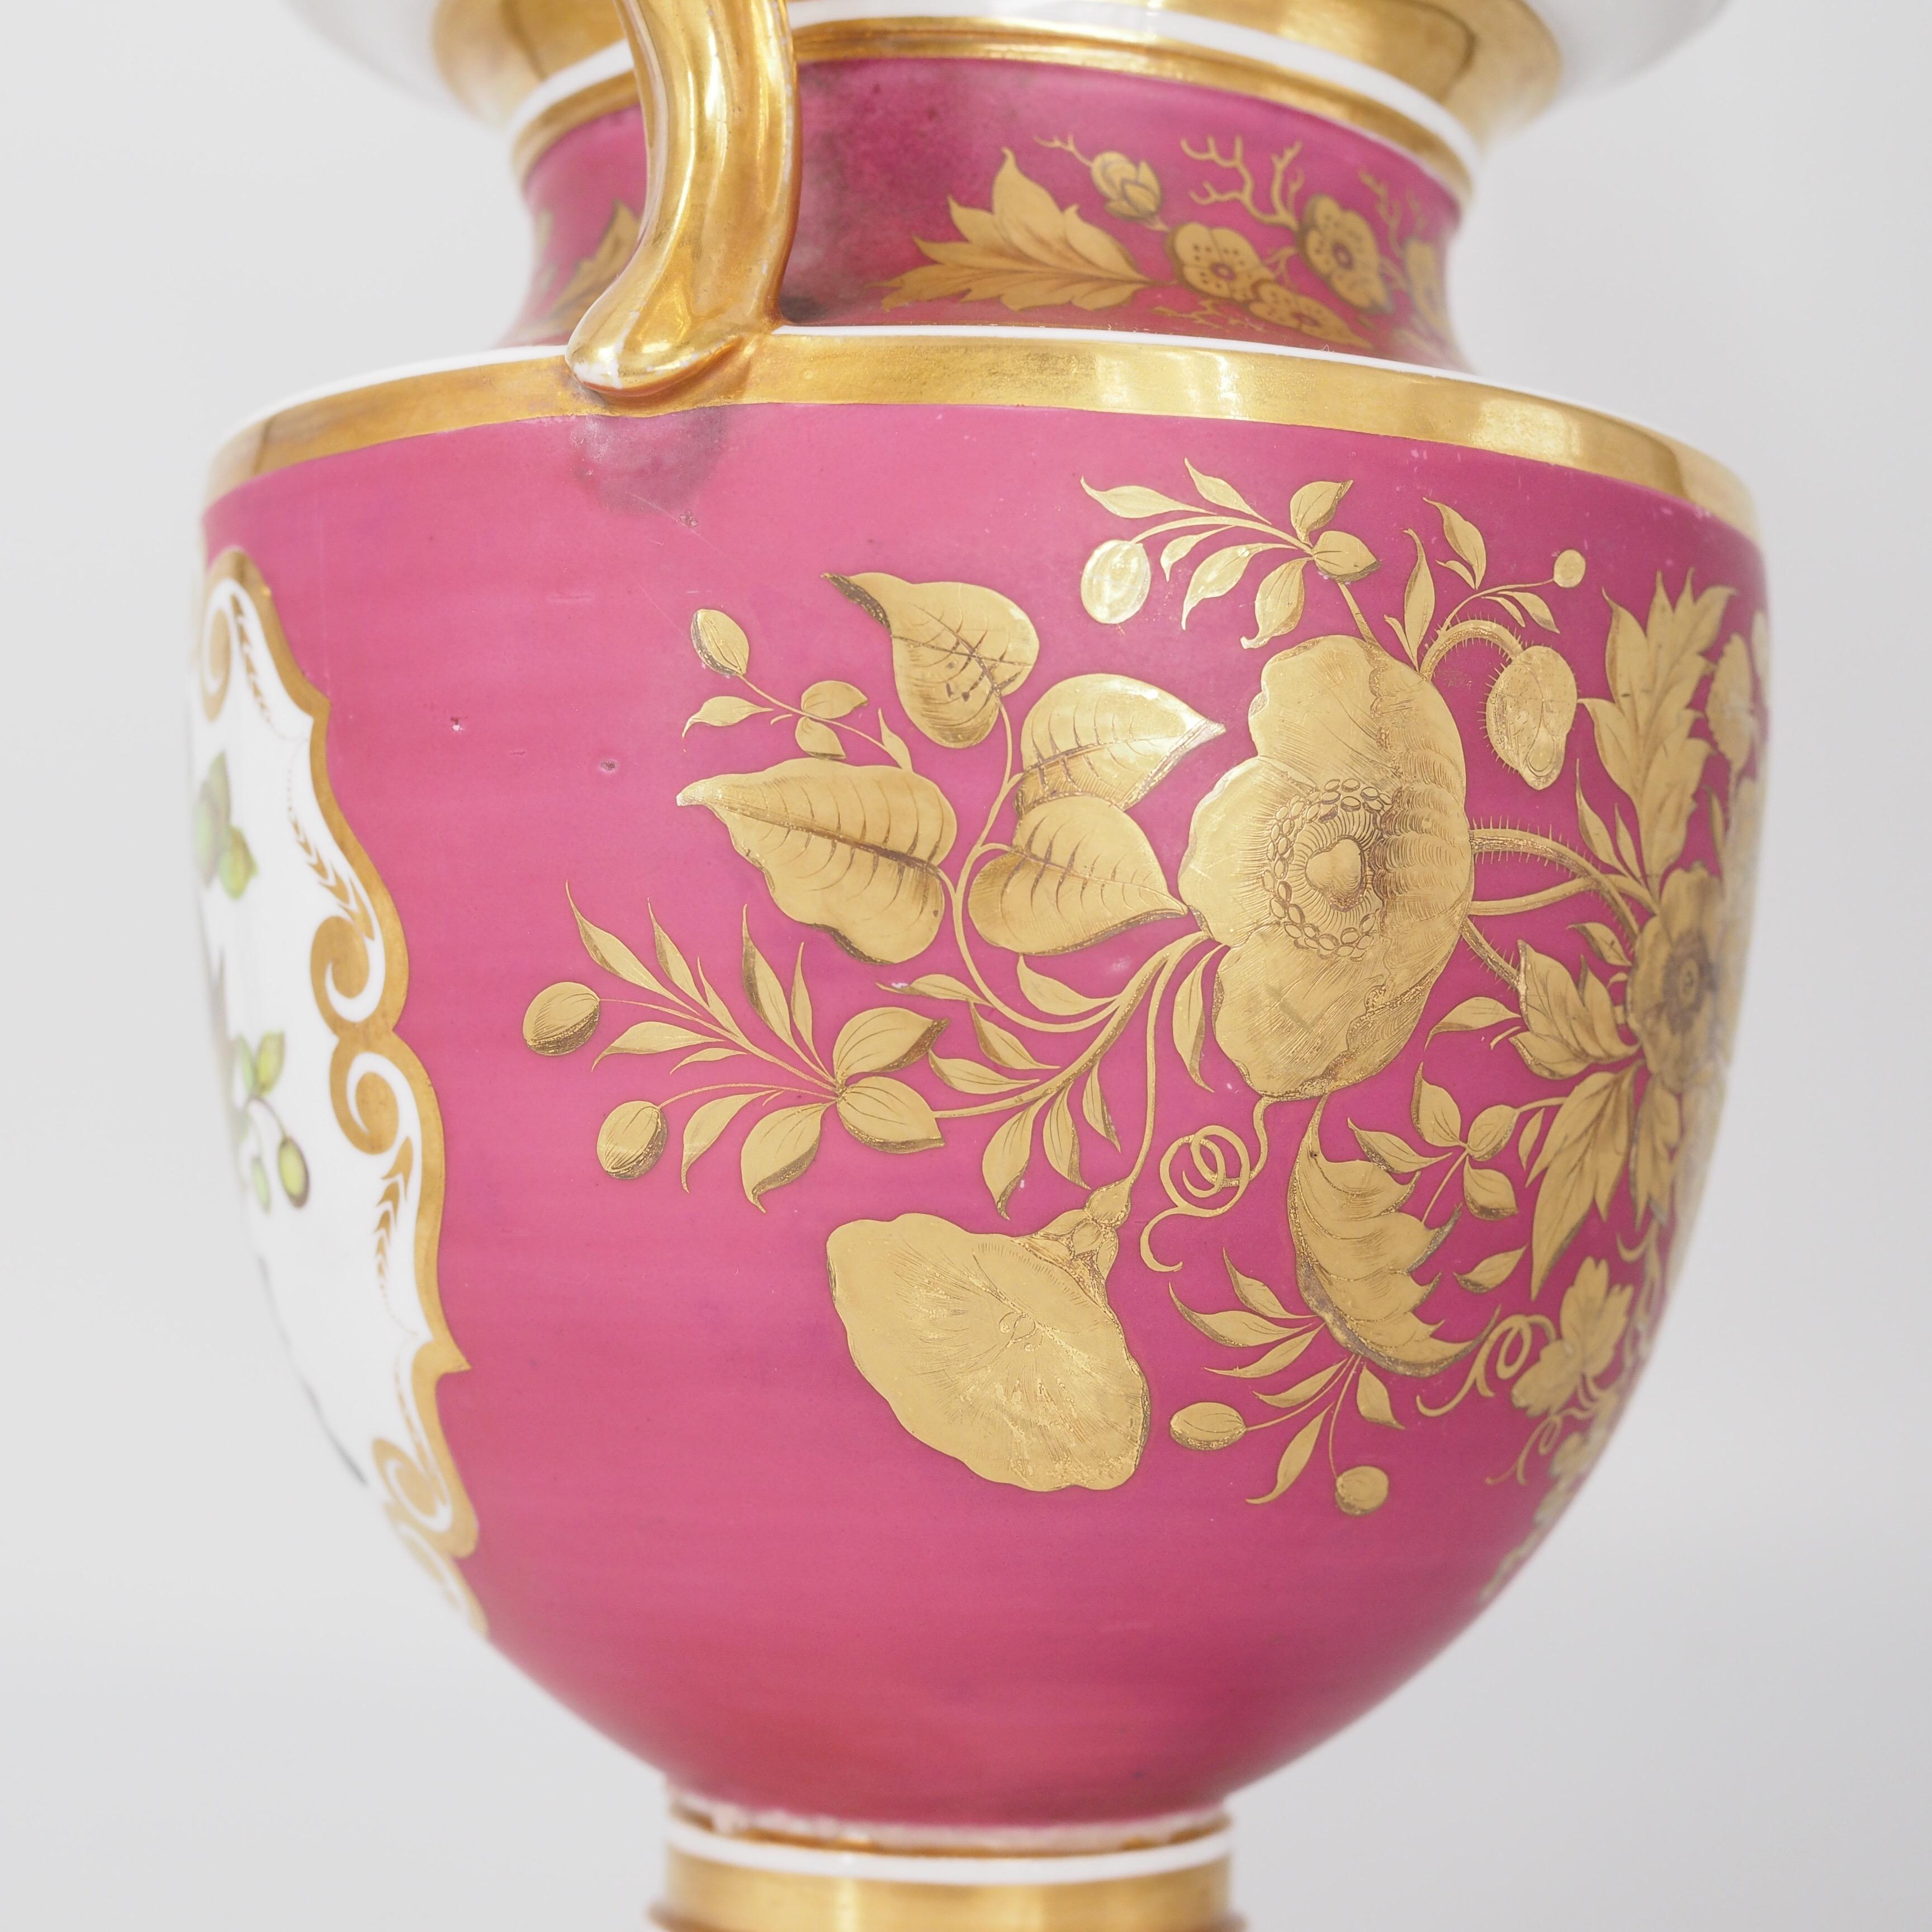 Hand-Painted English Porcelain Classical Vase with Flower Panels, Claret Ground, c. 1825 For Sale